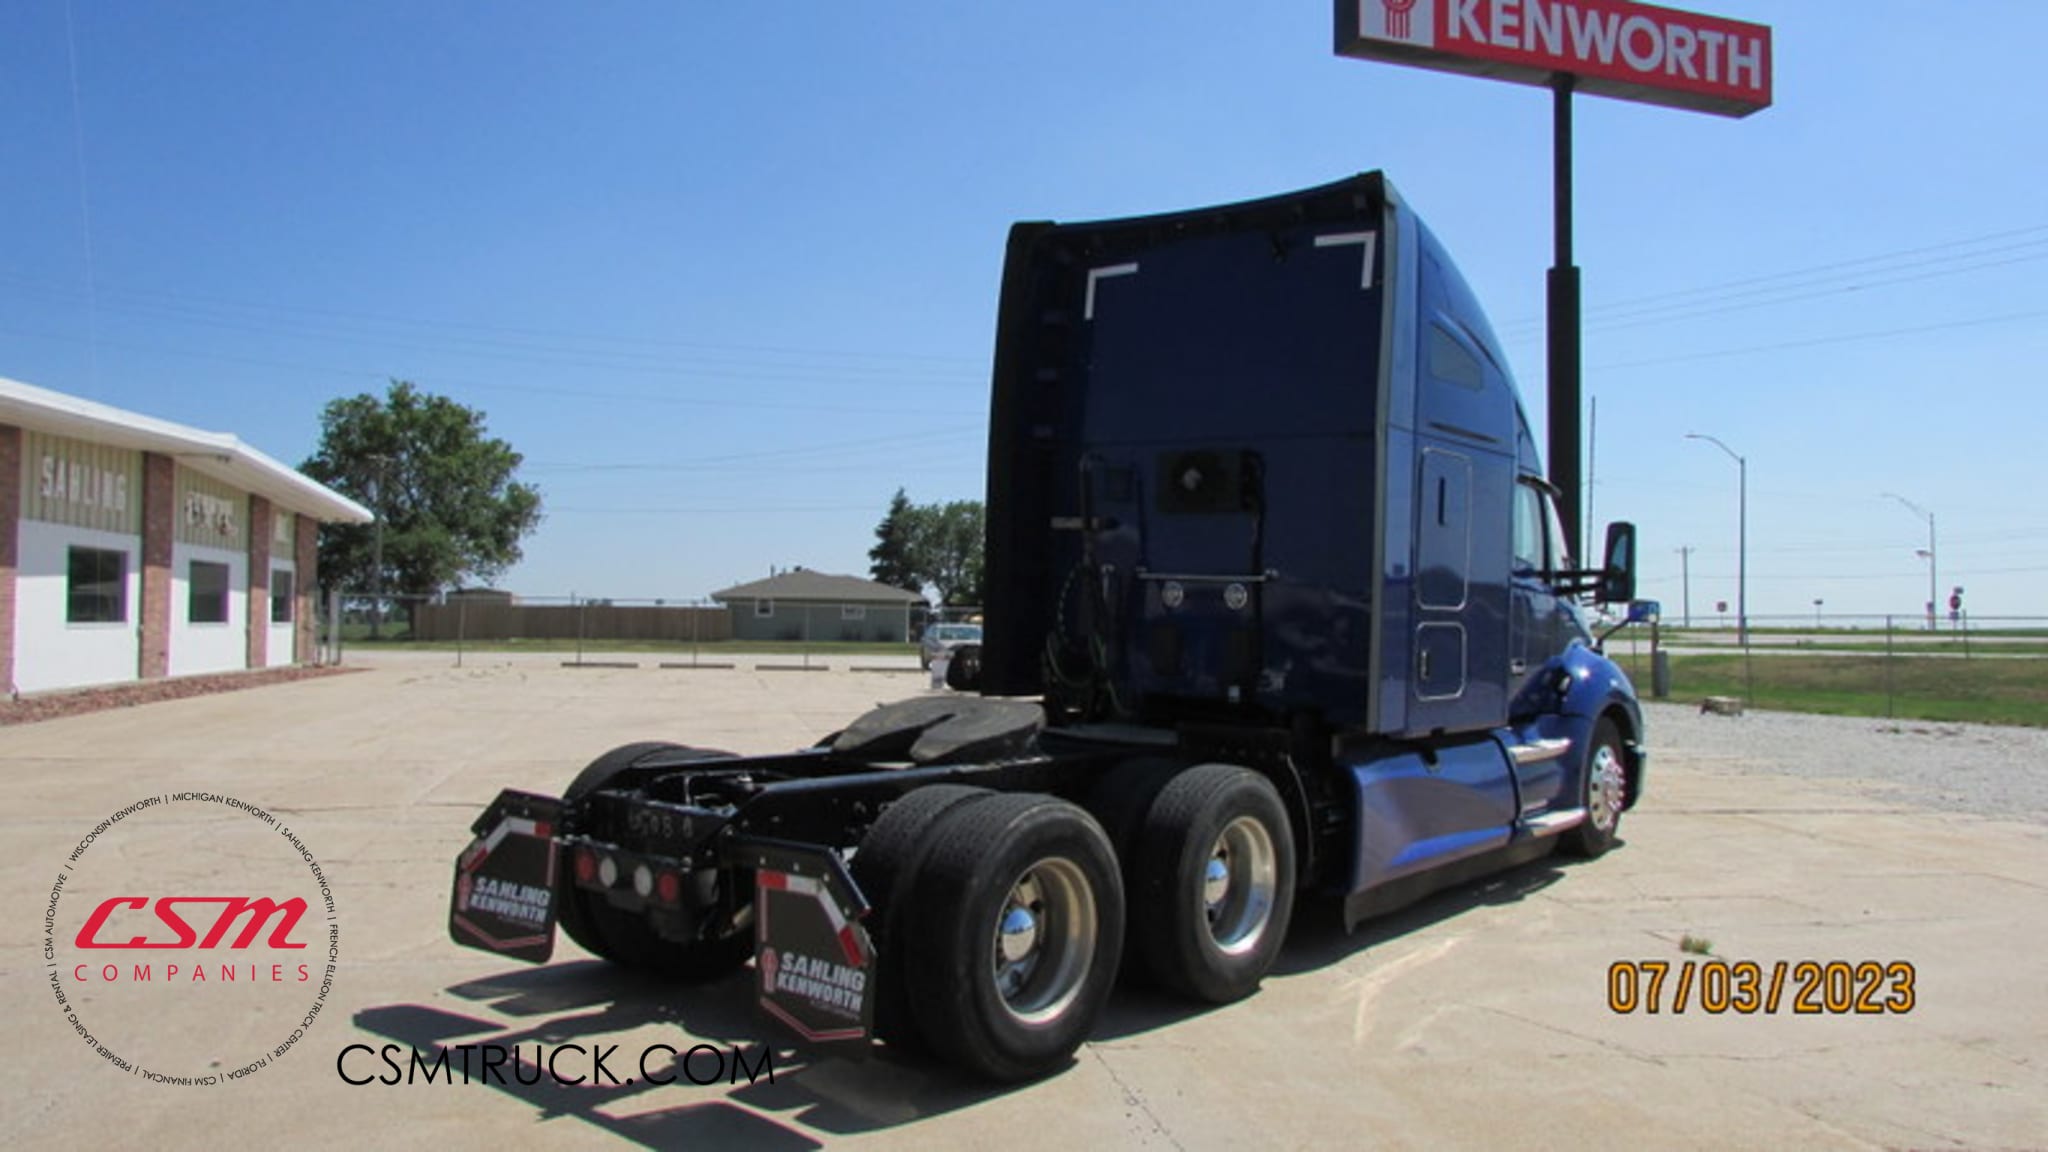 Exterior rear passenger side for this 2020 Kenworth T680 (Stock number: ULJ354405)